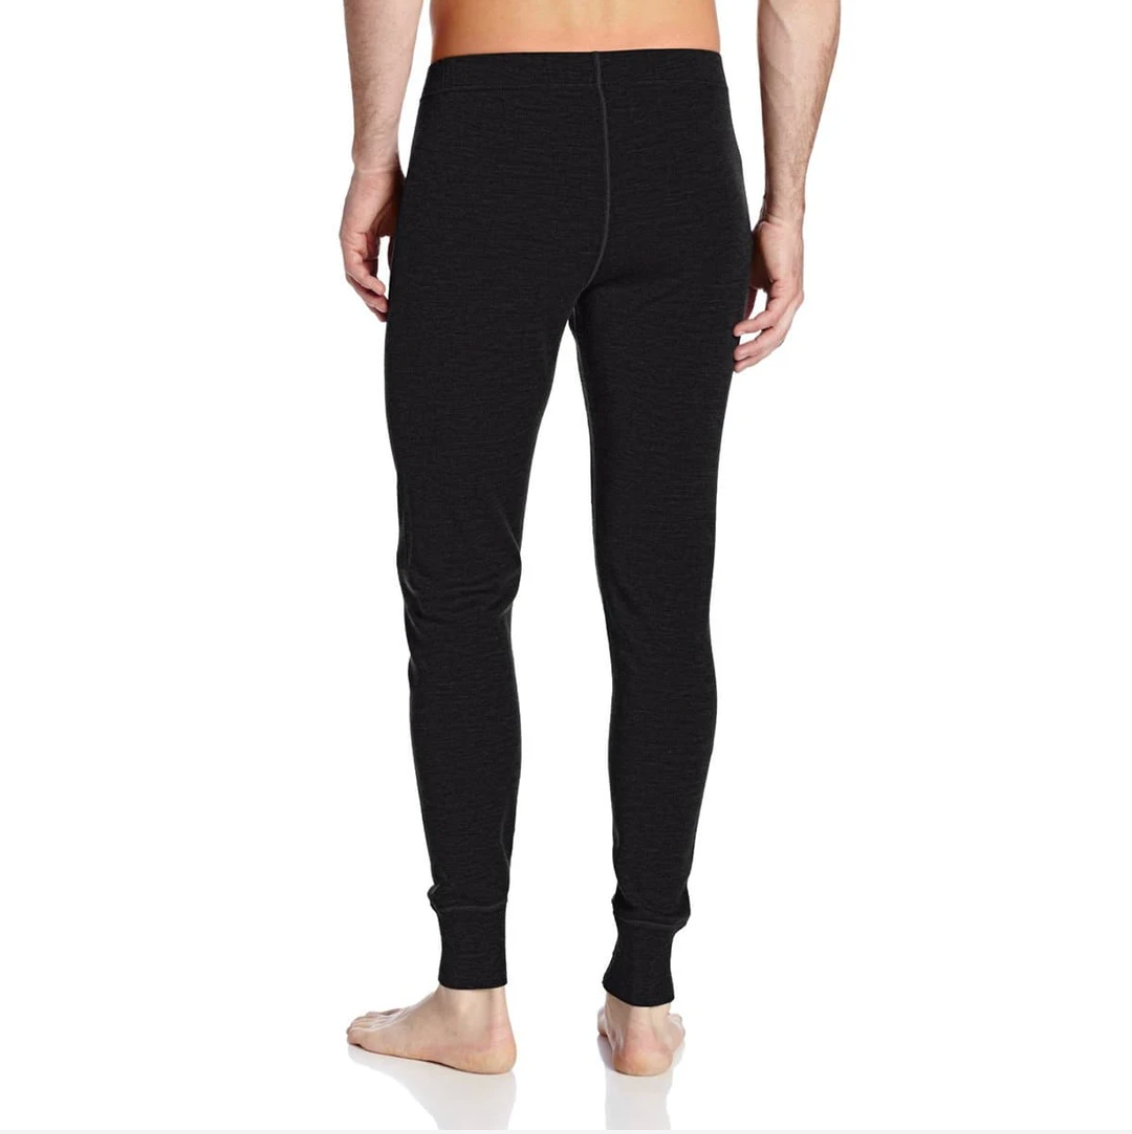 minus33 men's midweight wool bottoms in black on model back view